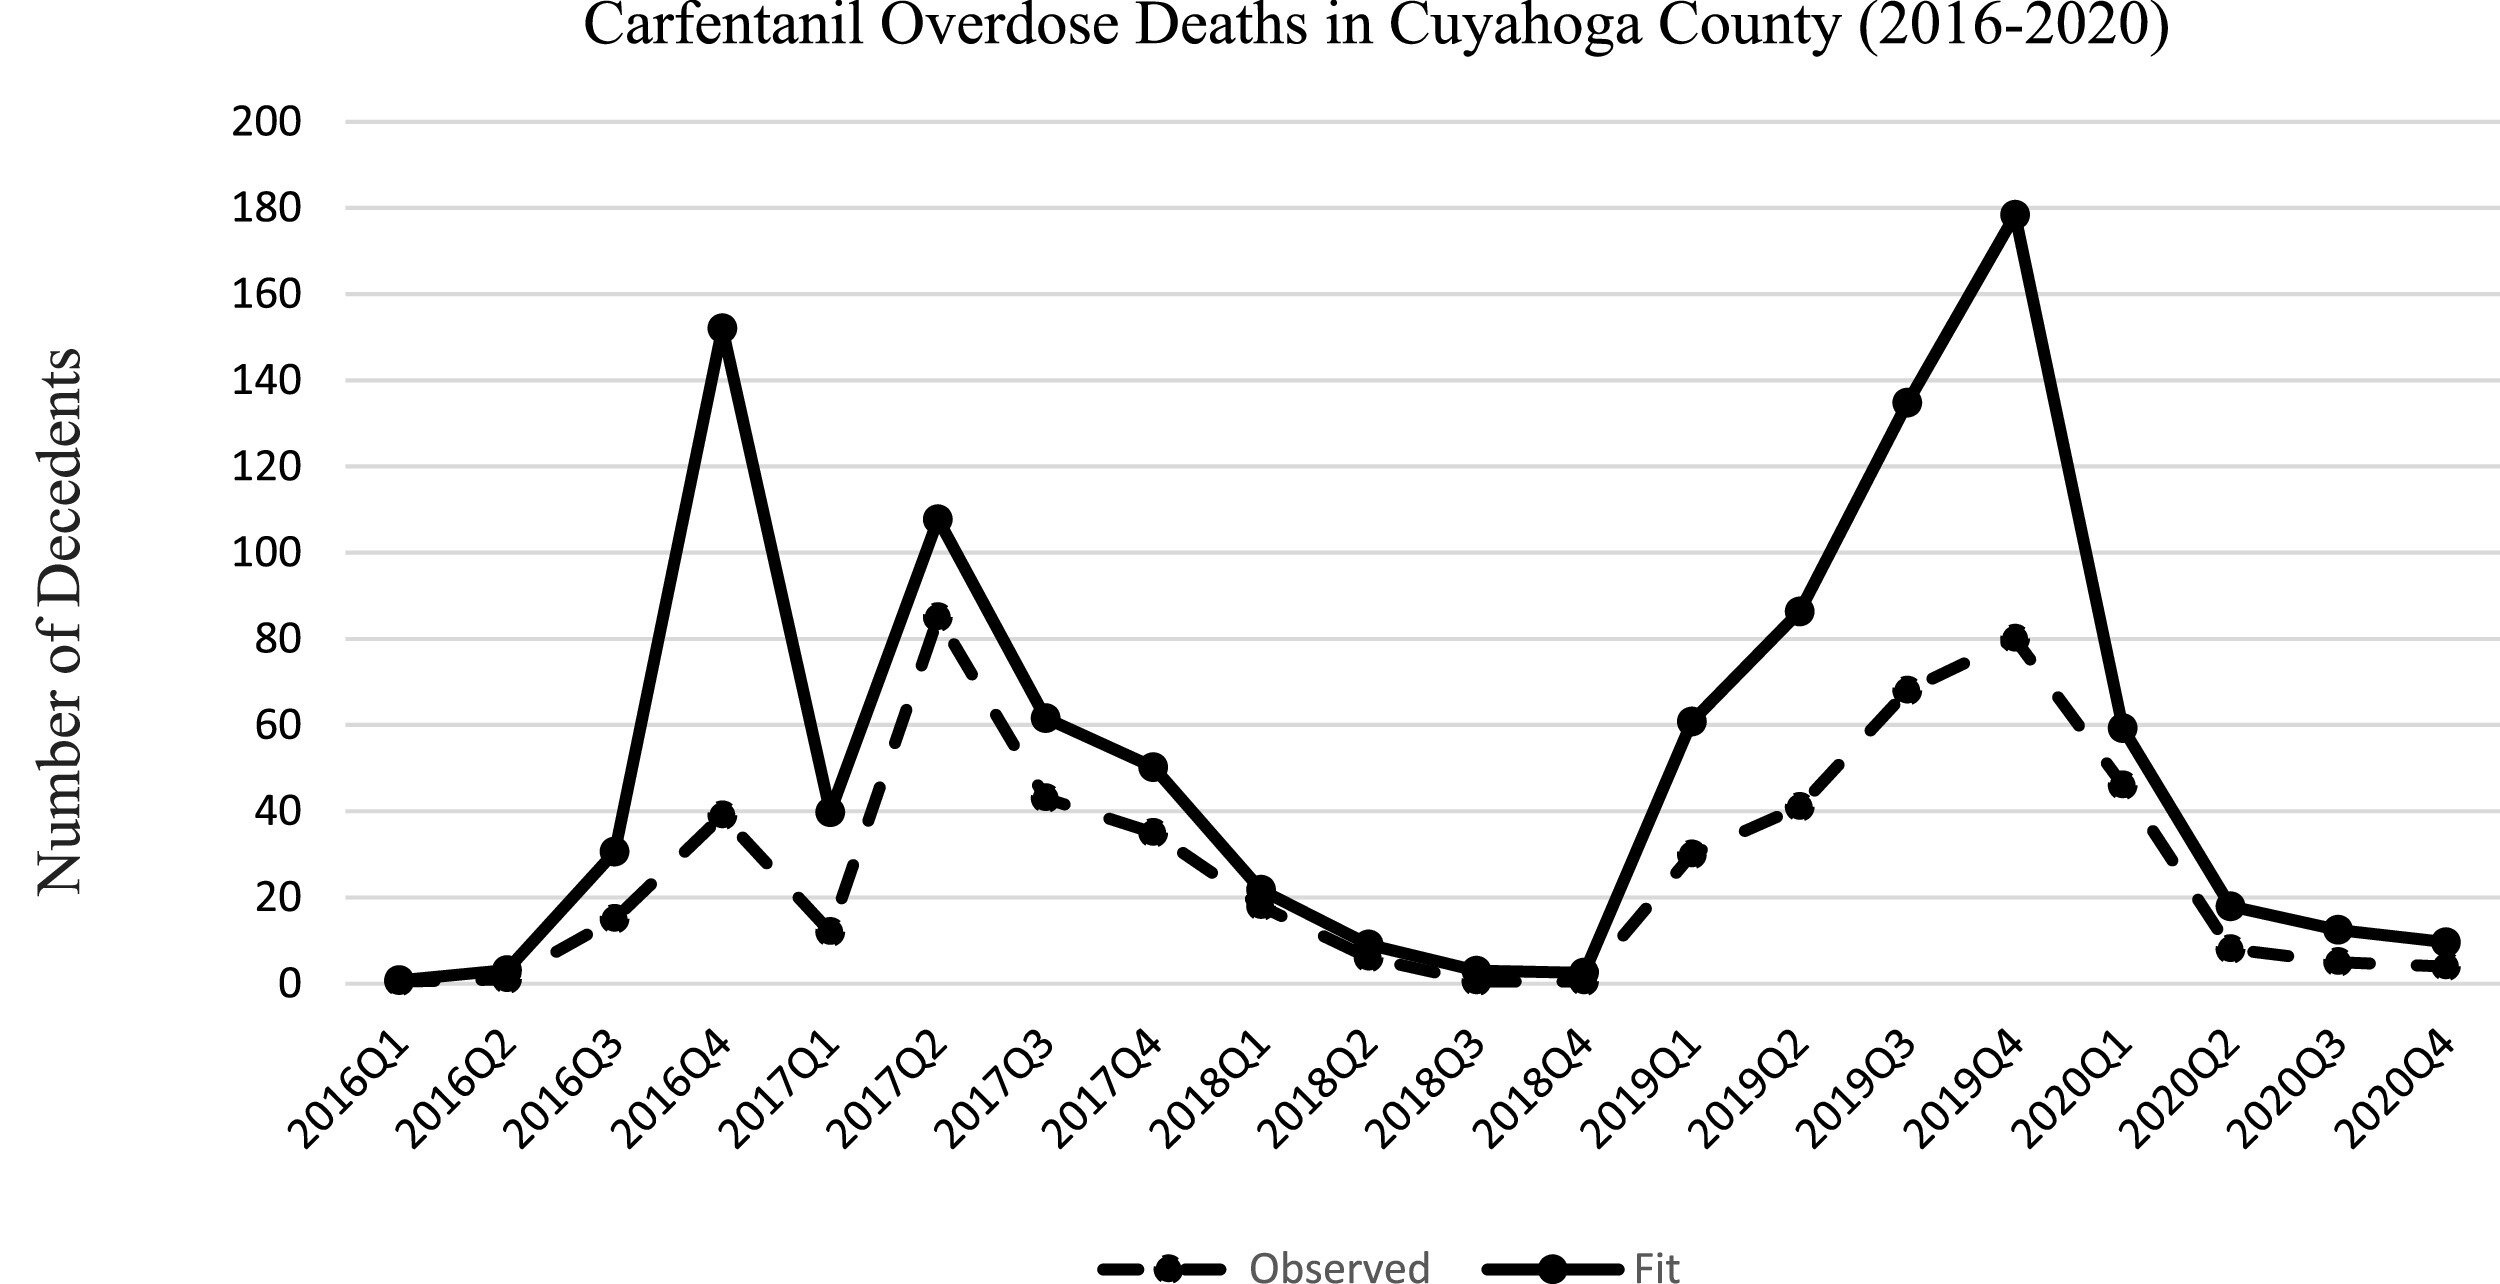 Preventing fatal overdoses in the local community